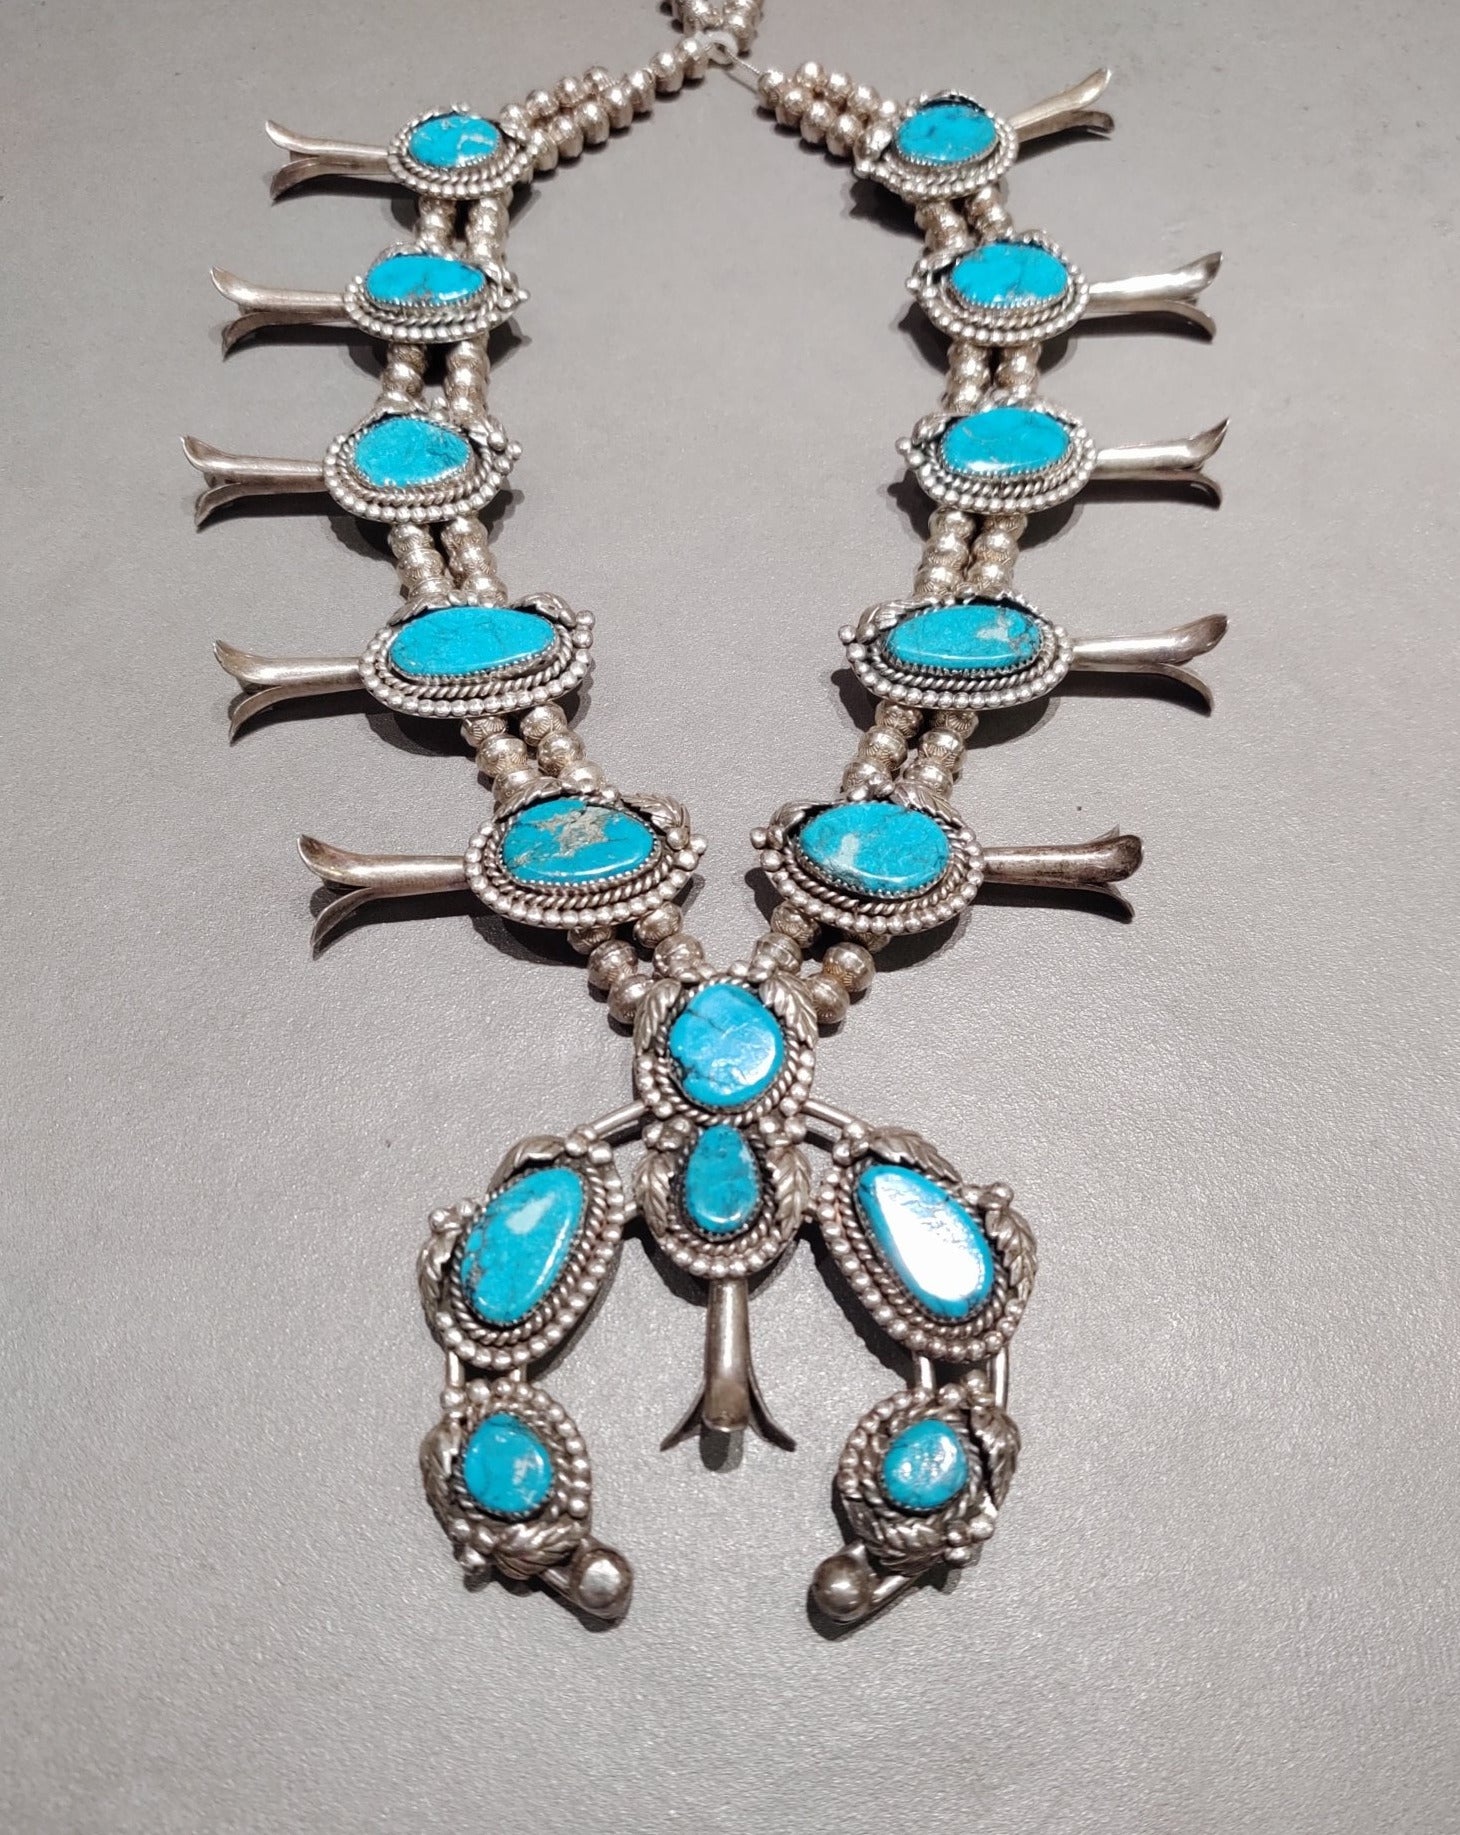 Turquoise Sterling Squash Blossom